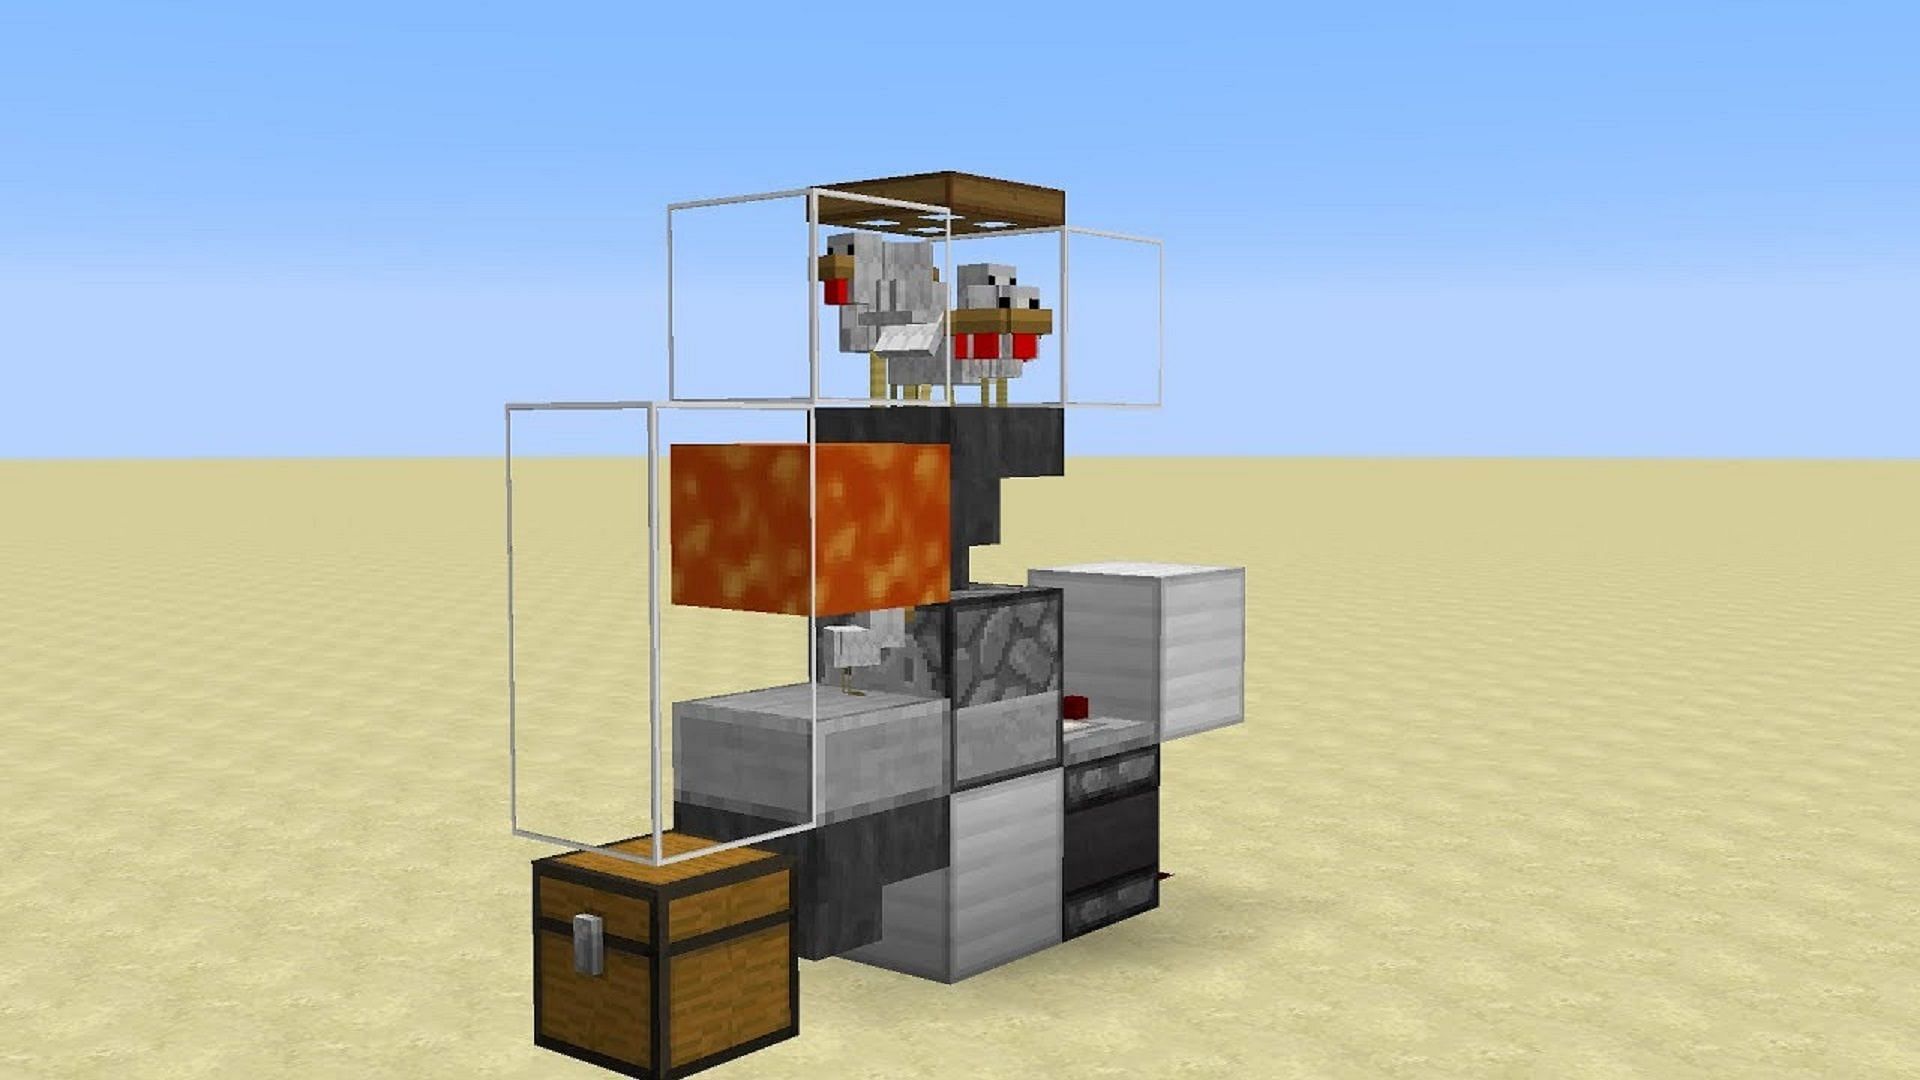 A smaller-scale automatic chicken farm in Minecraft (Image via Benry/YouTube)